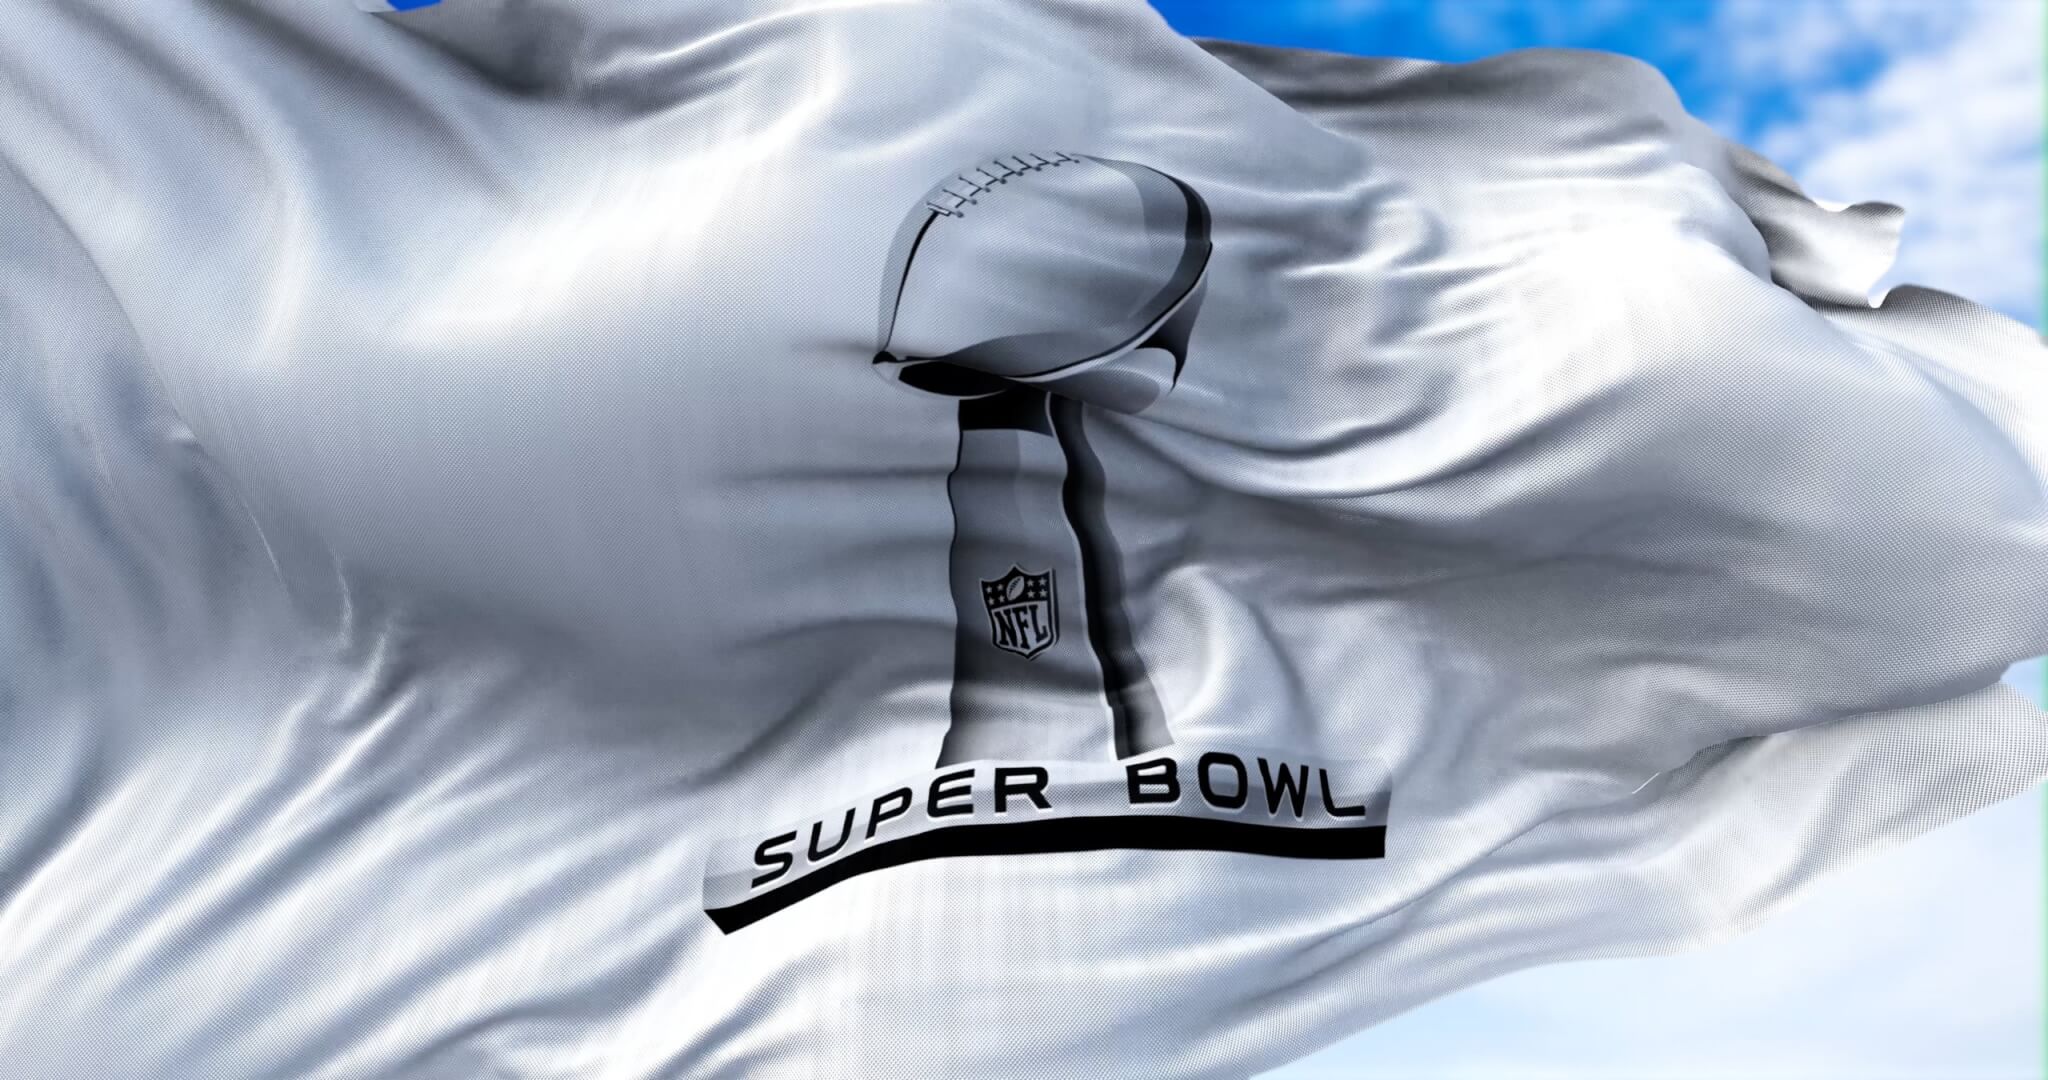 NFL Super Bowl flag with Lombardi Trophy on it